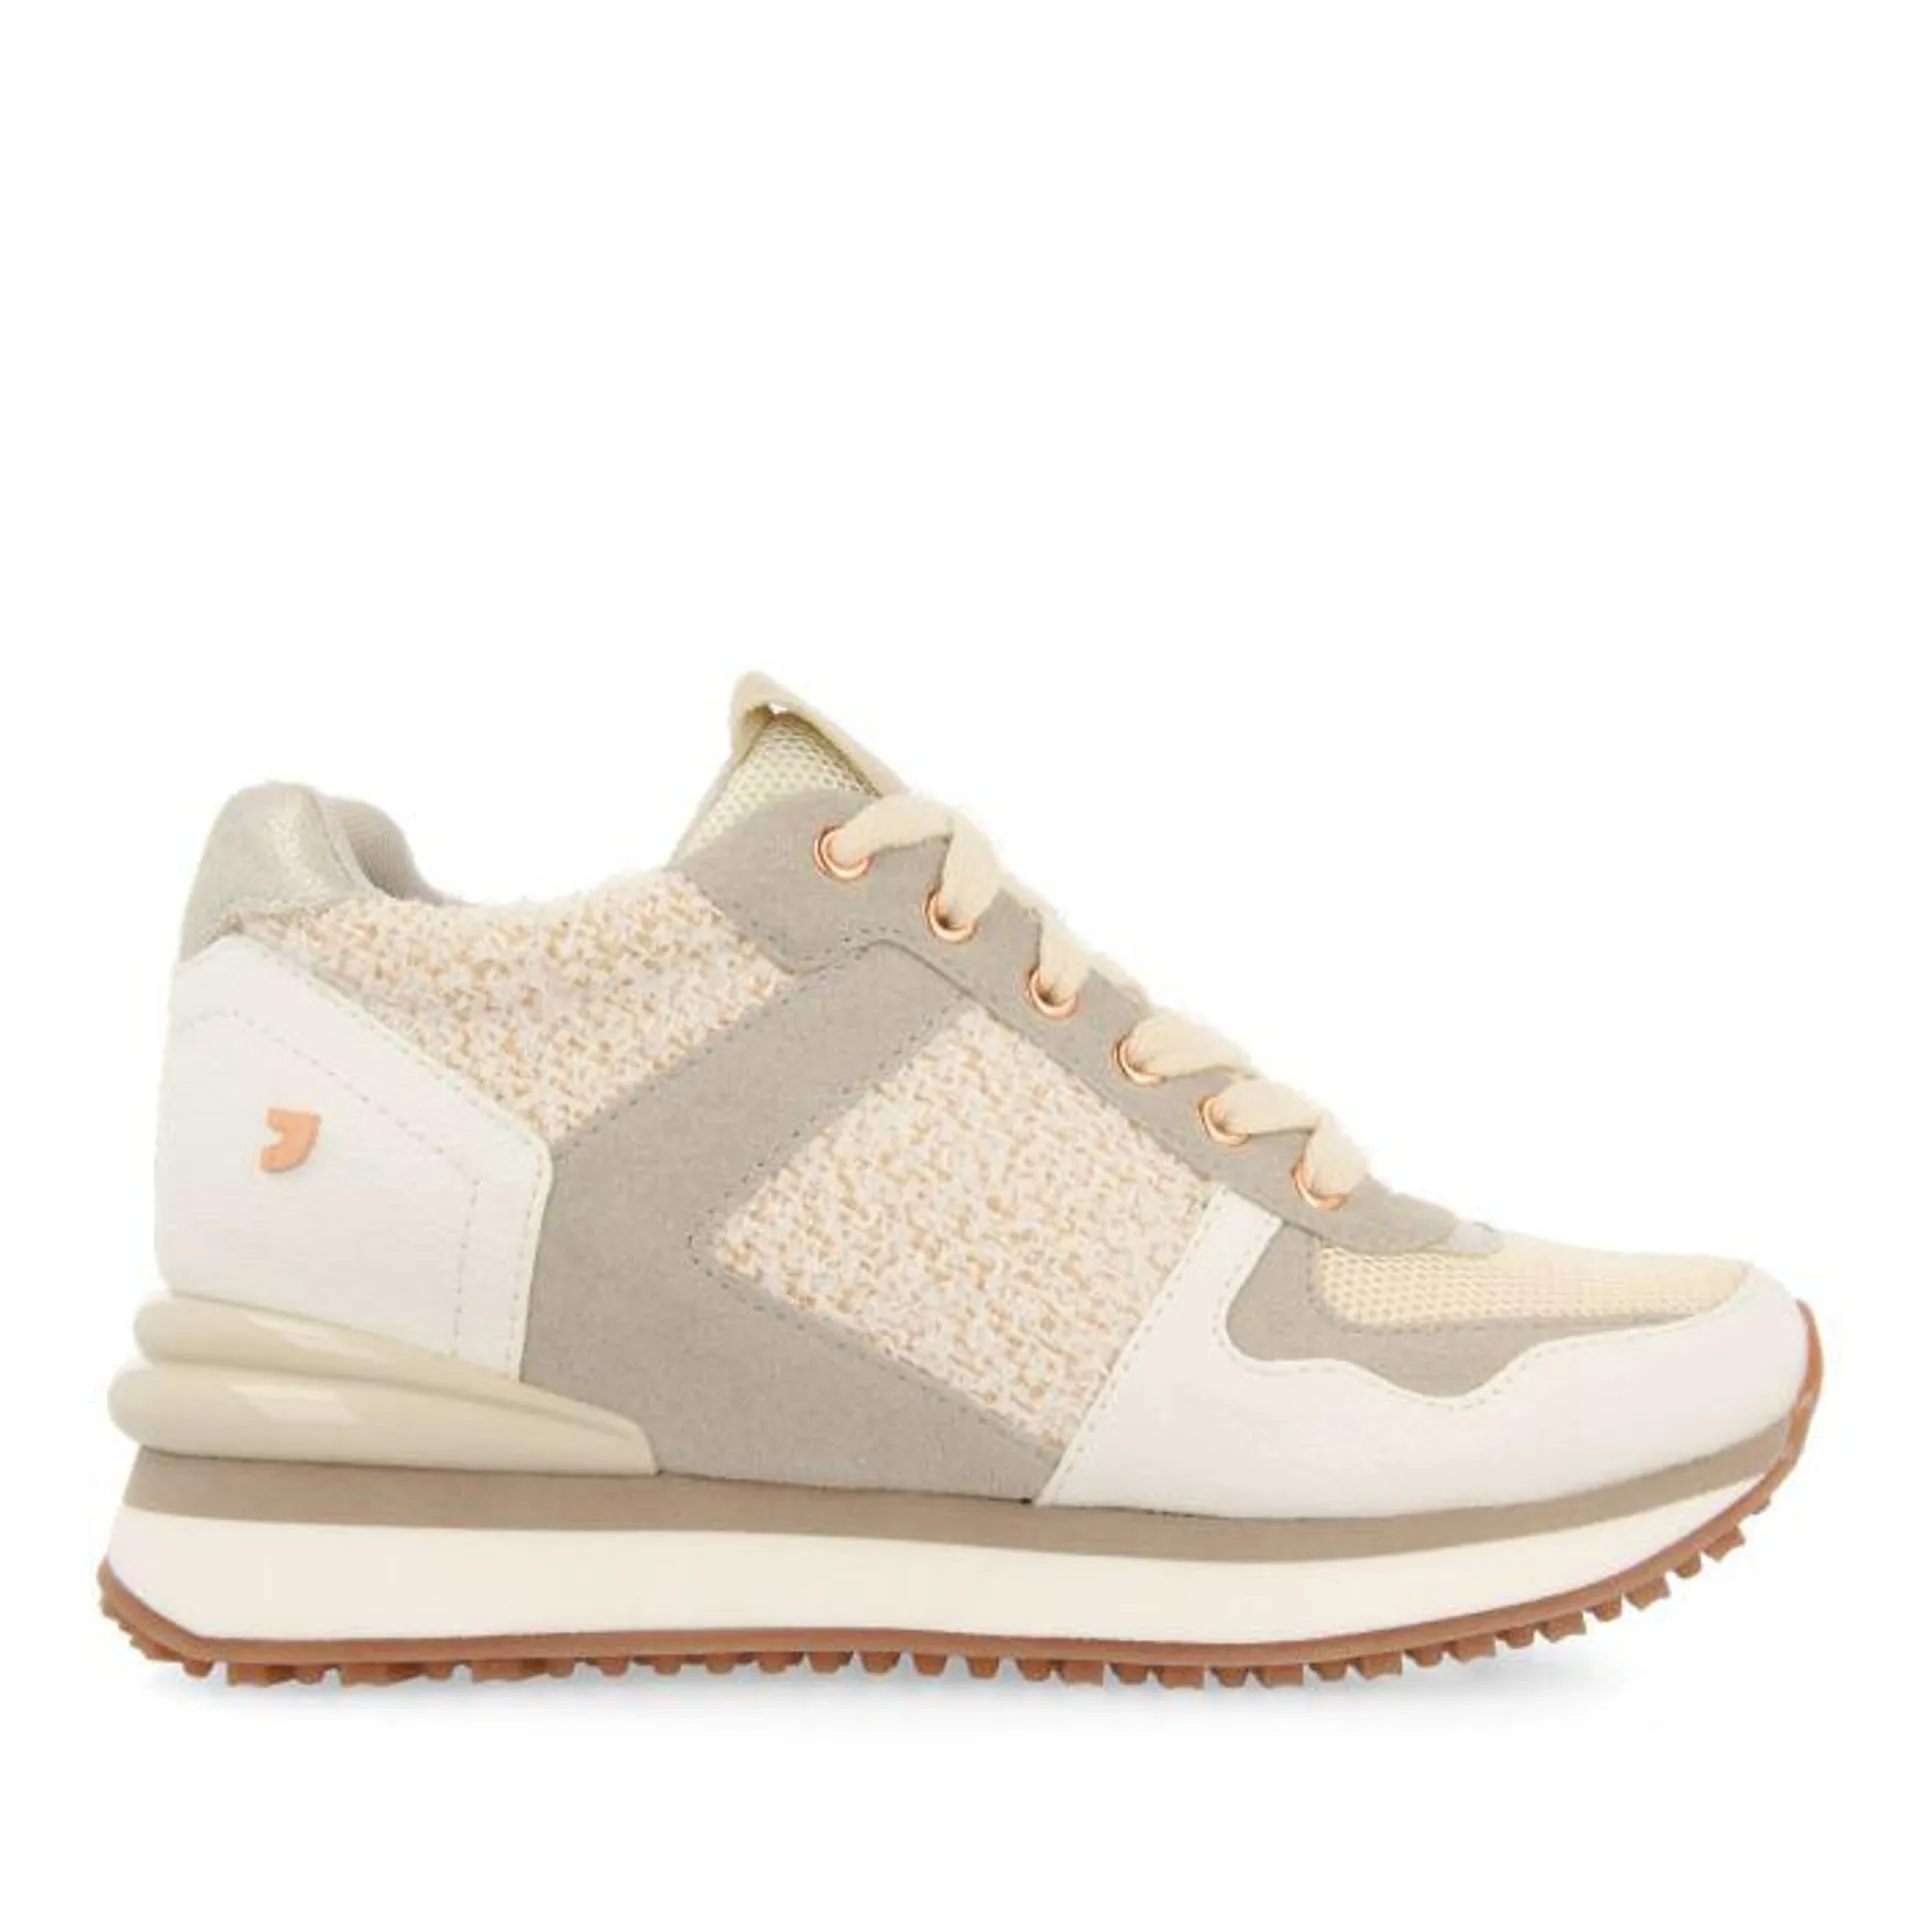 Lellig women's off-white monochrome sneakers with inner wedges